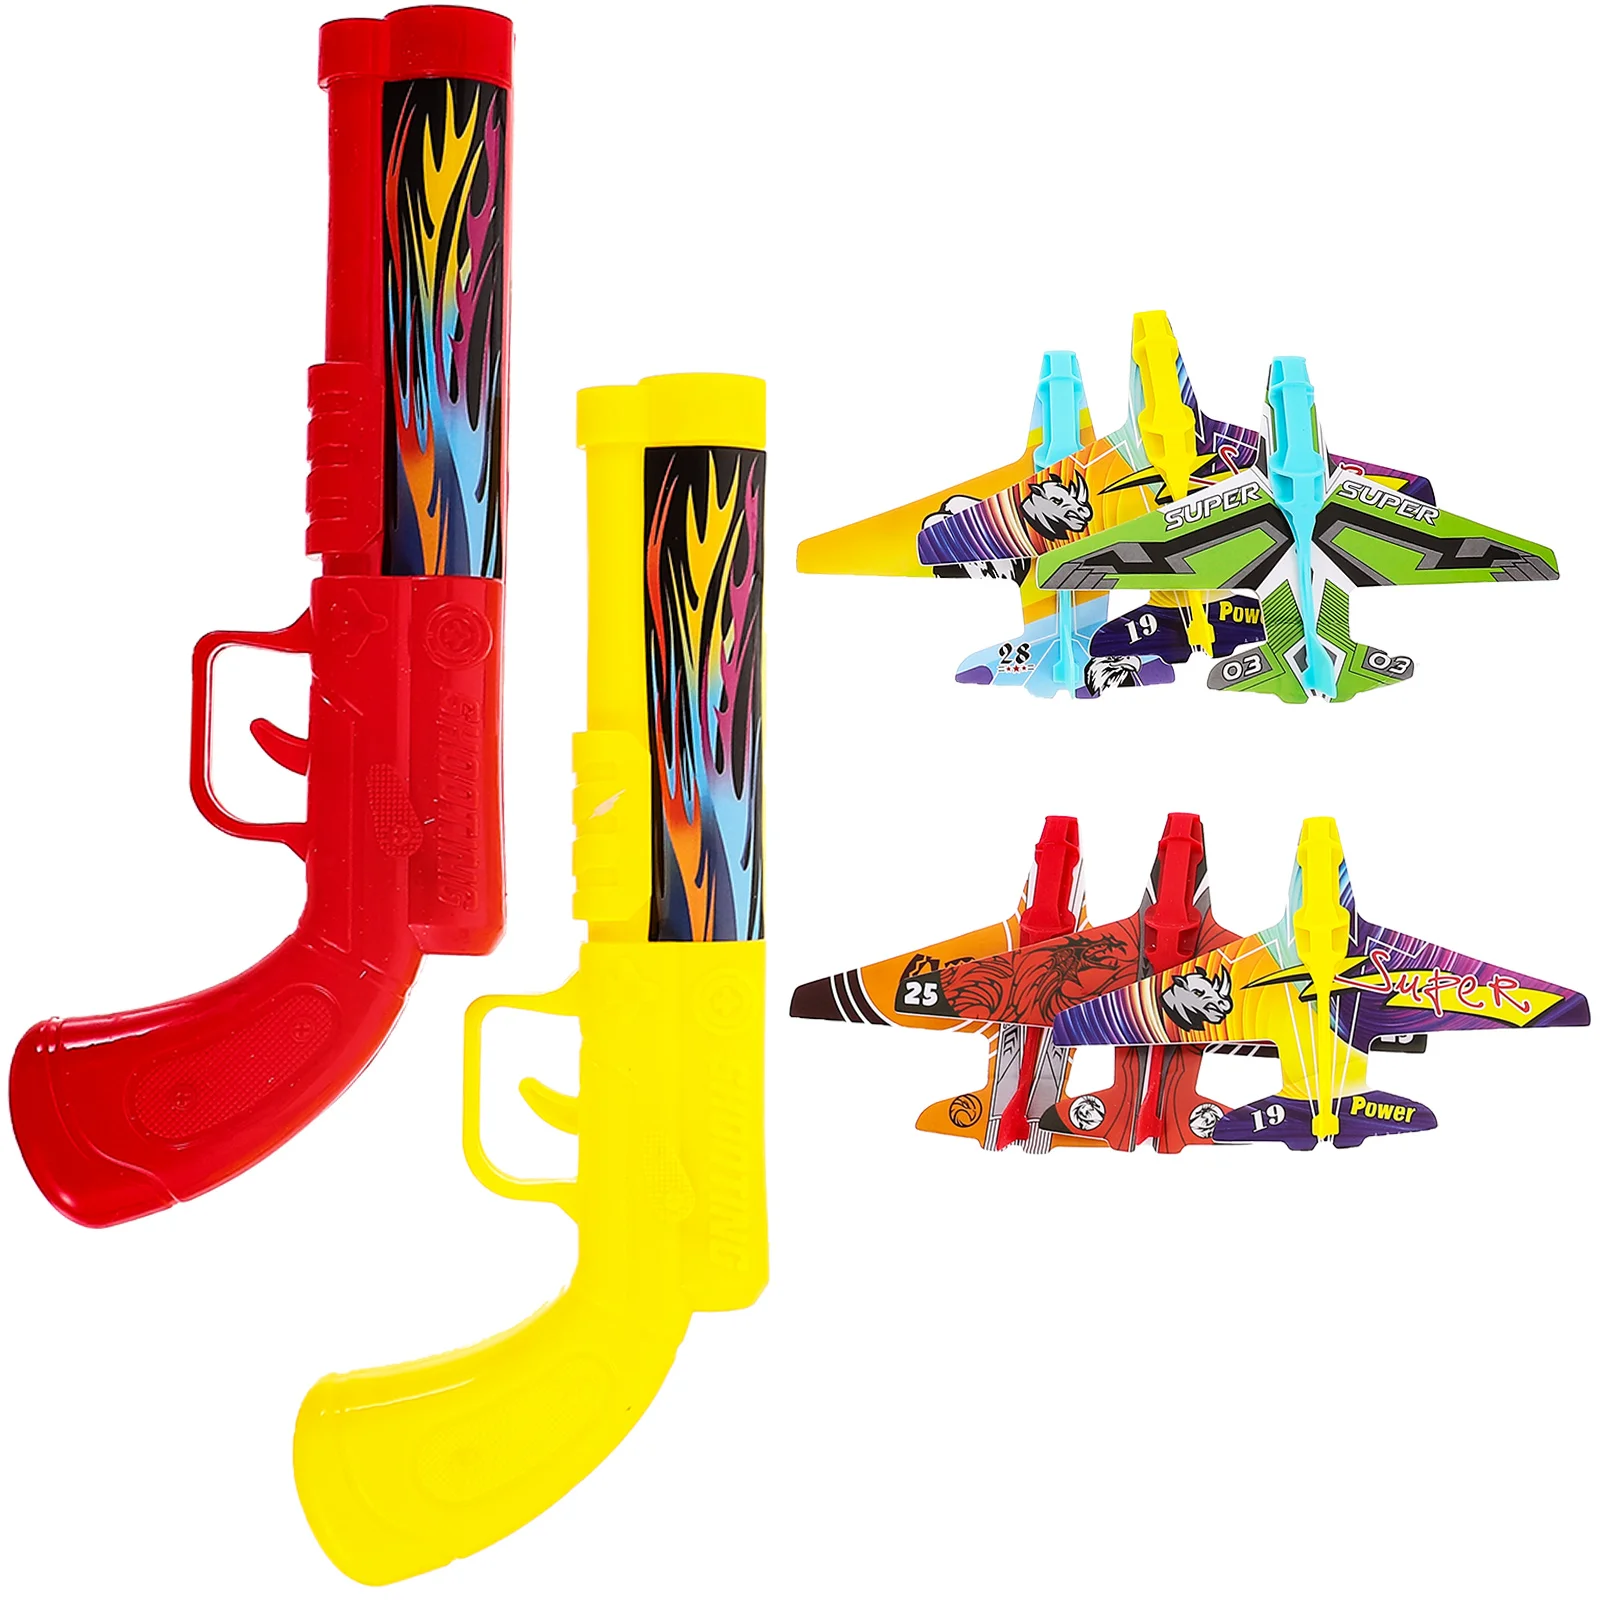 

Catapult Bubble Plane 5 Year Old Girl Birthday Gifts Airplane Foams Toy Kids Boy Outdoor Toys 6 Shooting Game Flying Disc